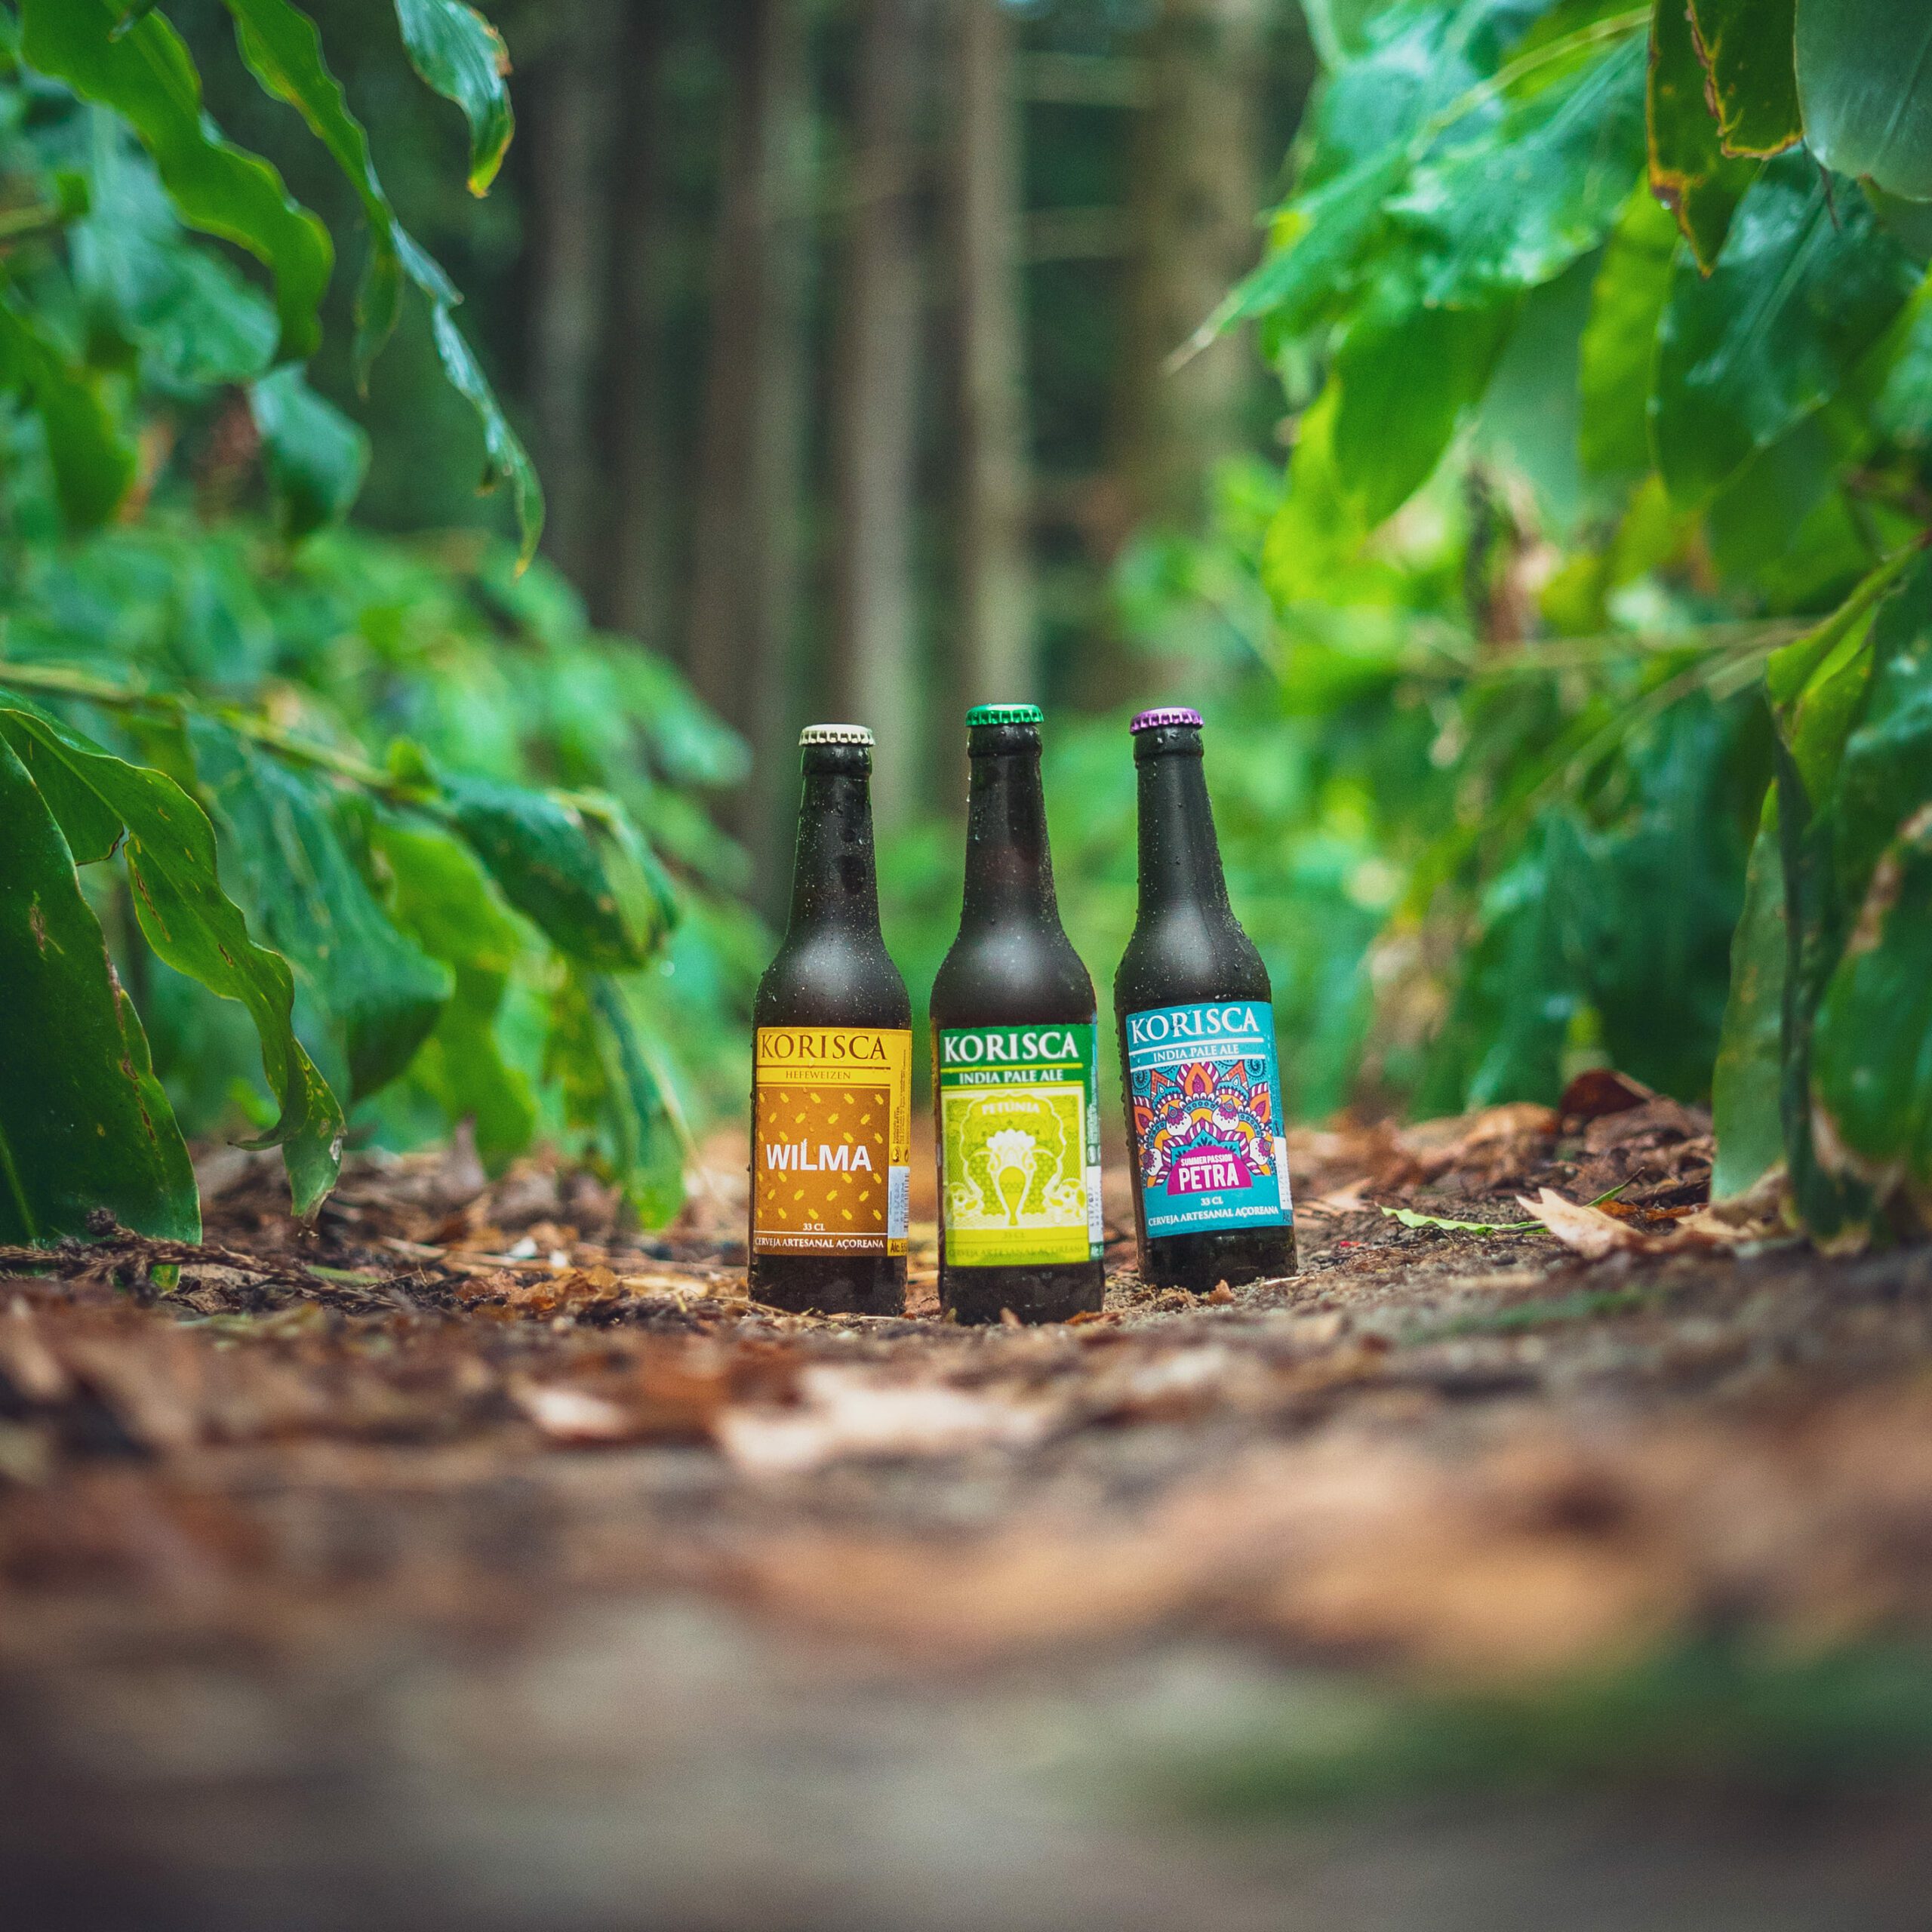 Three Azorean craft beers Korisca, Wilma (Hefeweizen), Petúnia (IPA) and Petra (IPA), on the ground with brown leaves, green vegetation around them and trees in the background, in Sete Cidades, Ponta Delgada, São Miguel, Azores.